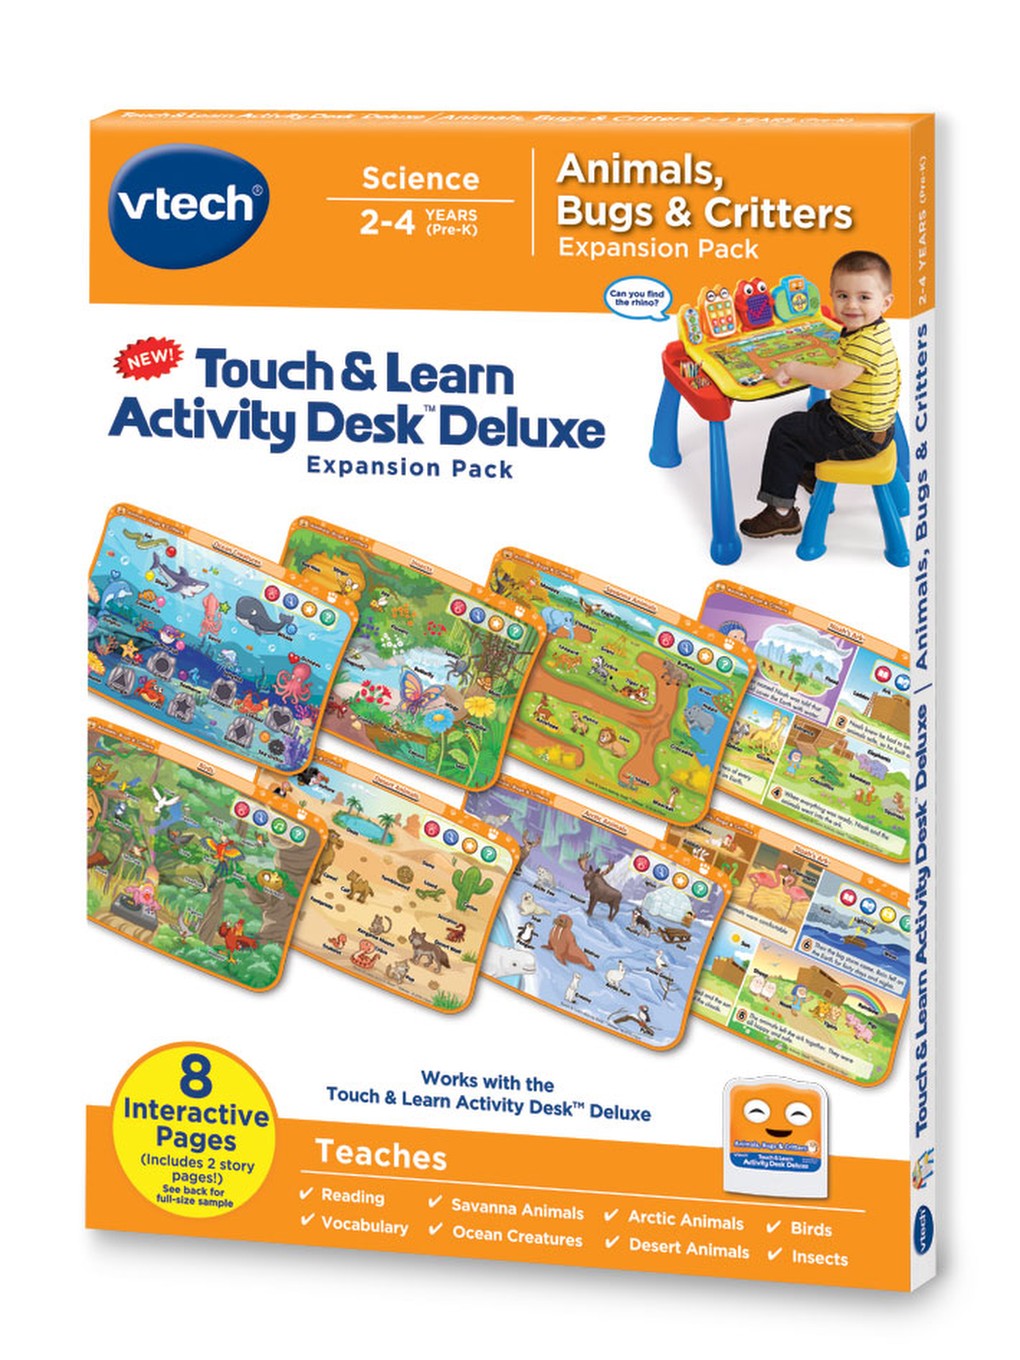 Vtech Touch & Learn Activity Desk for sale online 80-194800 